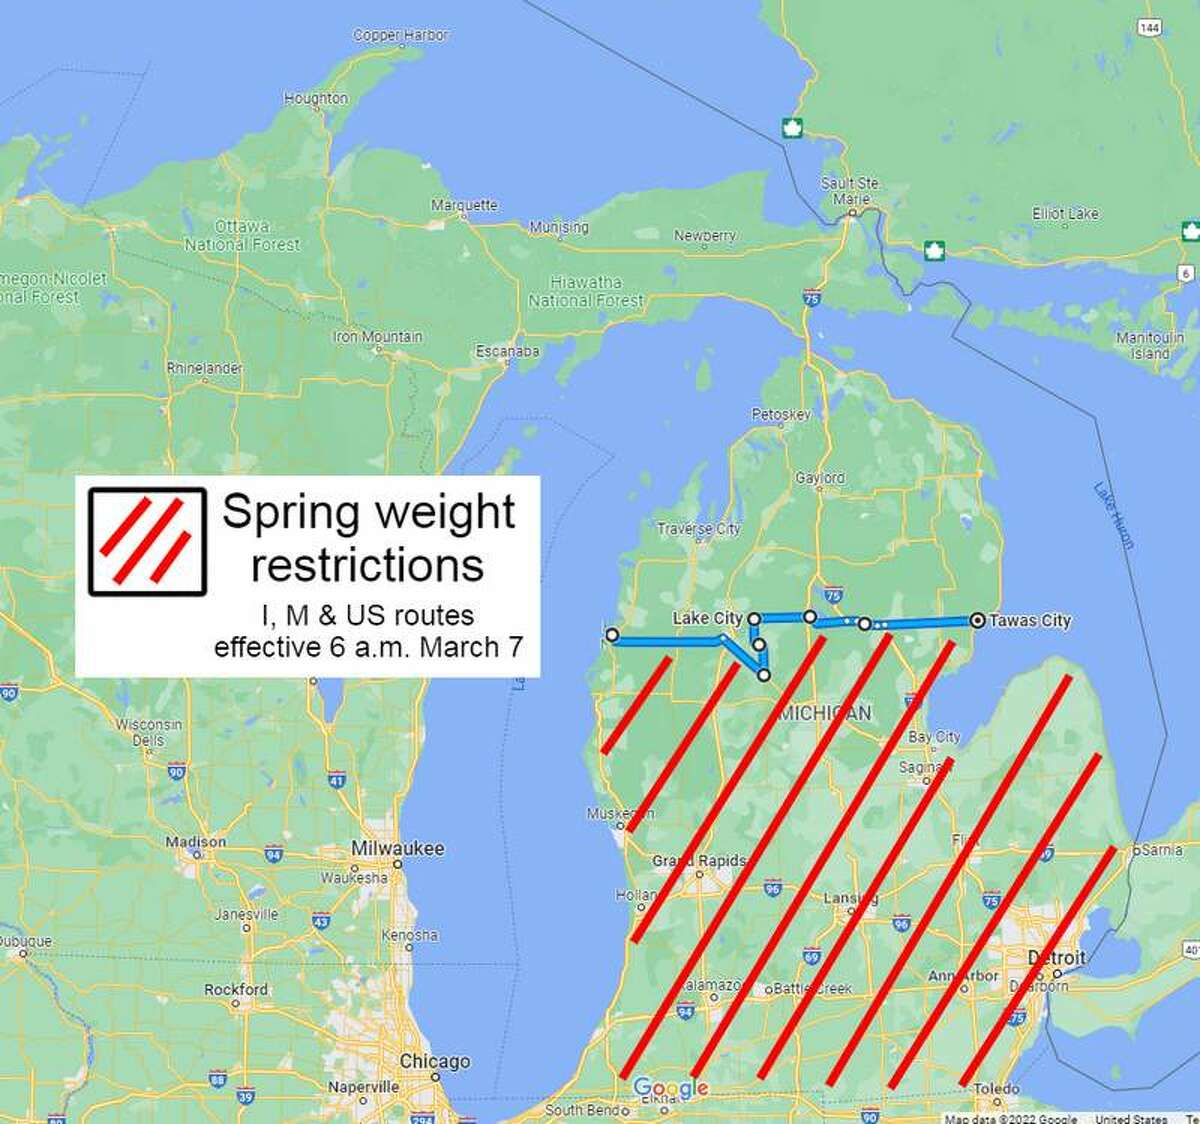 MDOT has announced seasonal weight restrictions on most state roads in the Lower Peninsula. The restrictions are meant to protects roads from damage during the thawing out across the state.